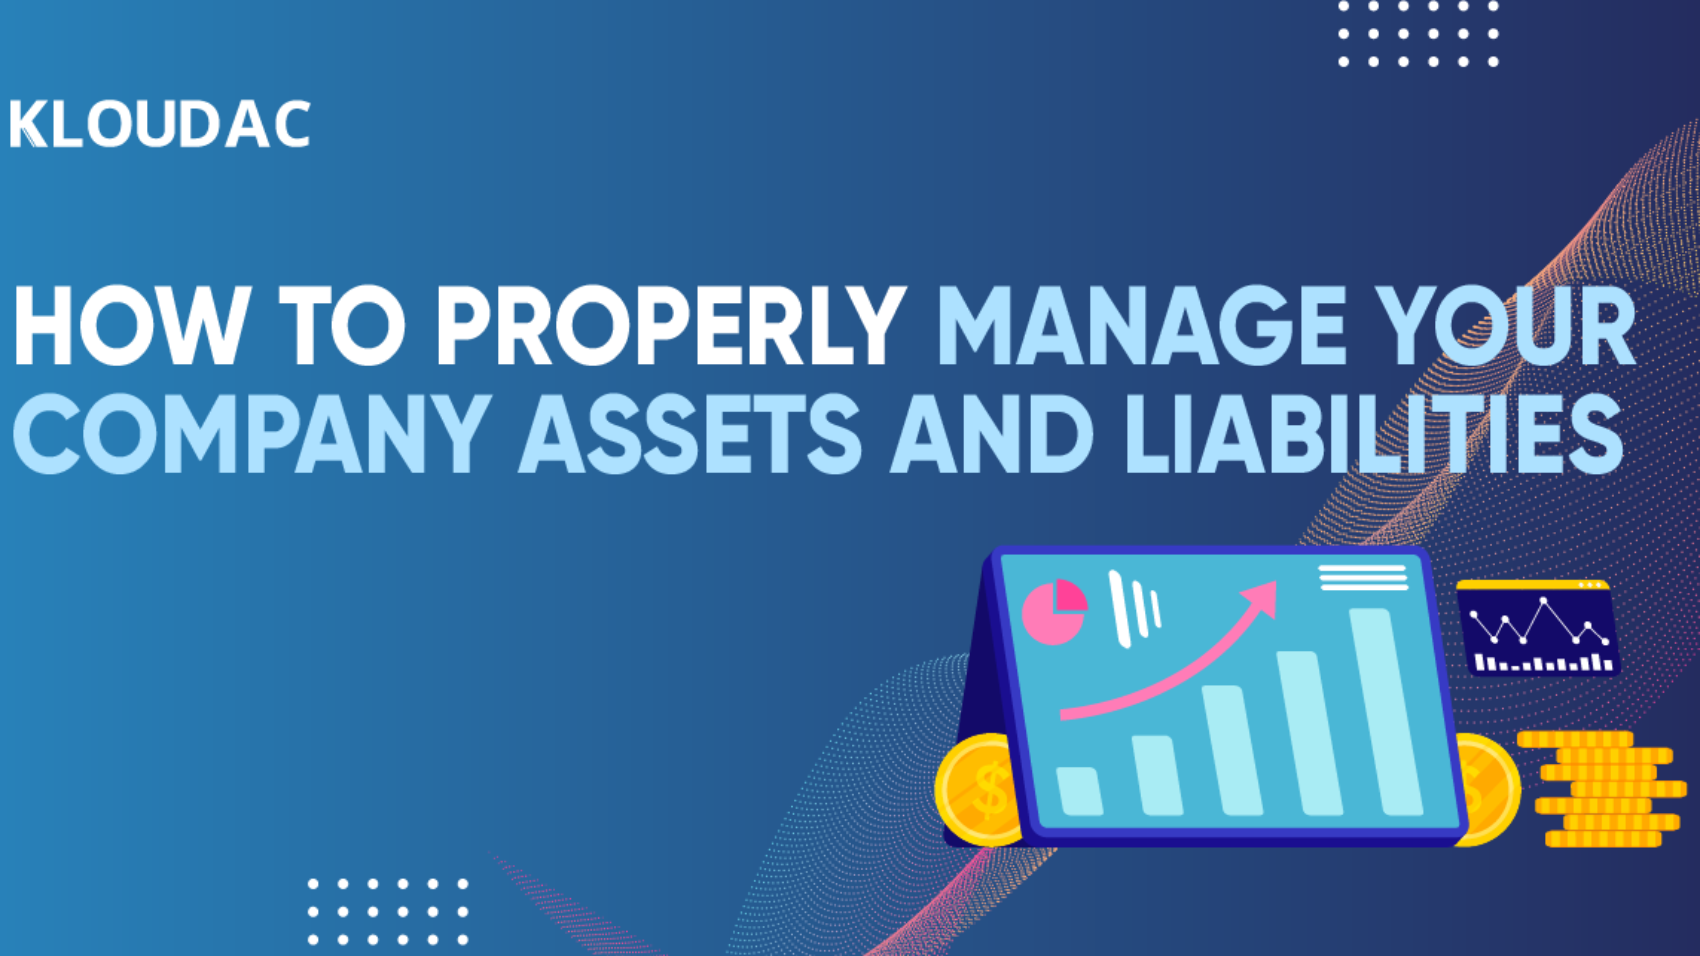 How to properly manage your company assets and liabilities